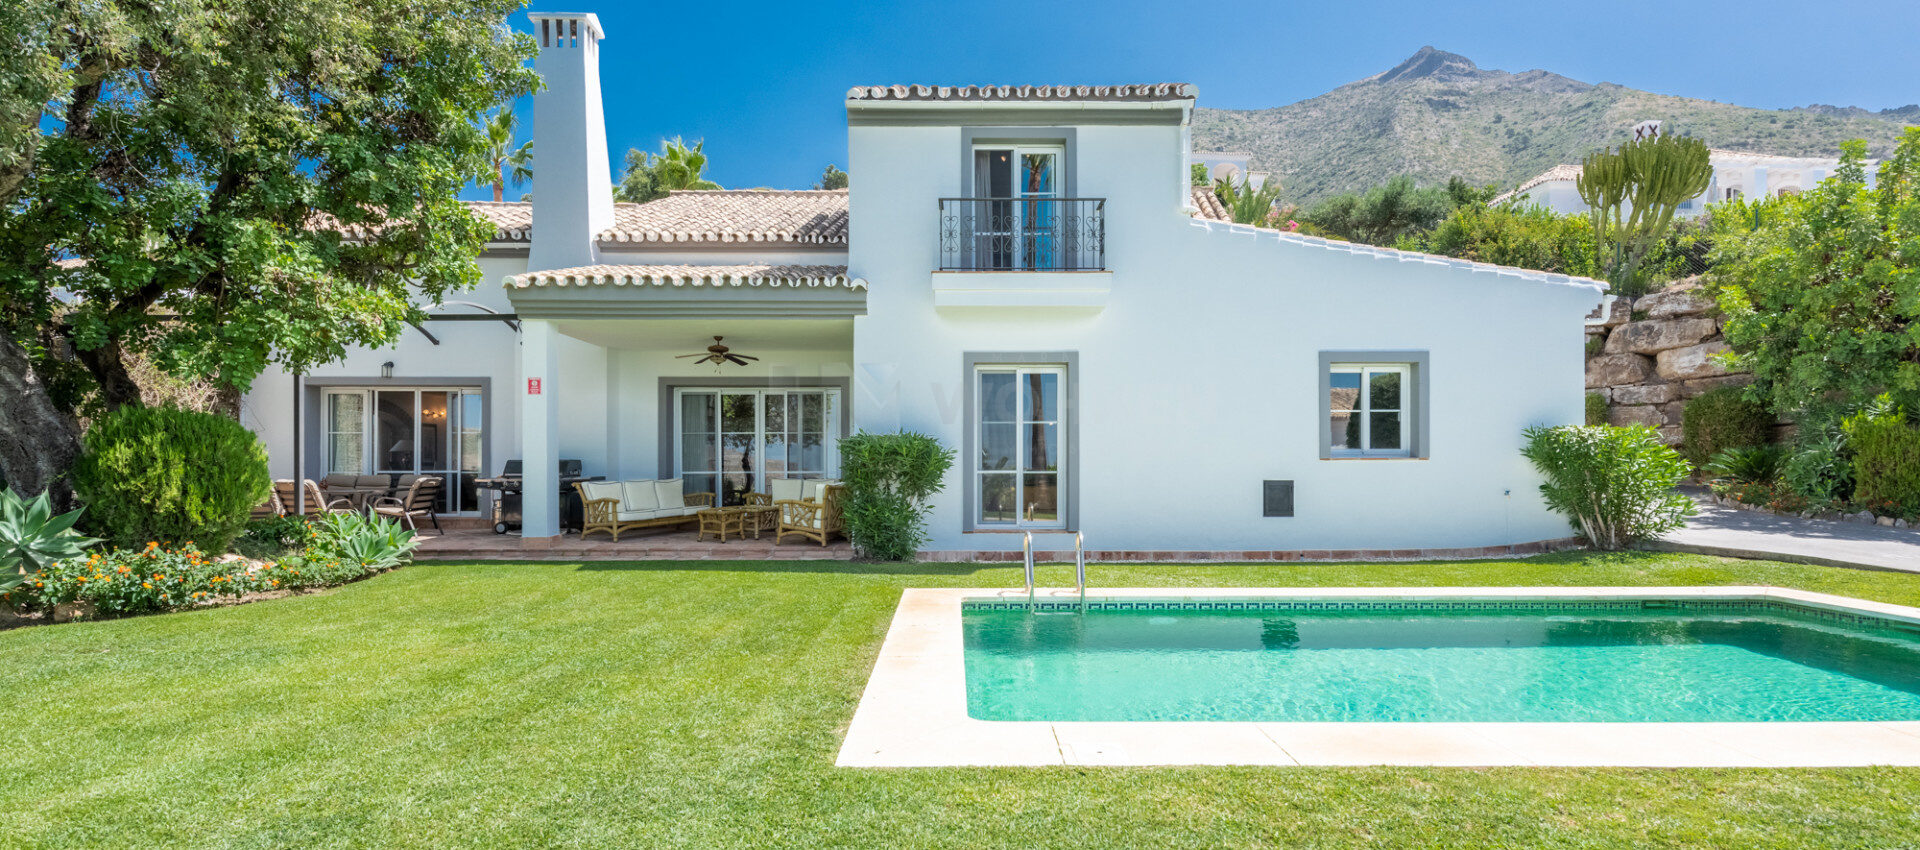 Charming villa in the hills above the Golden Mile